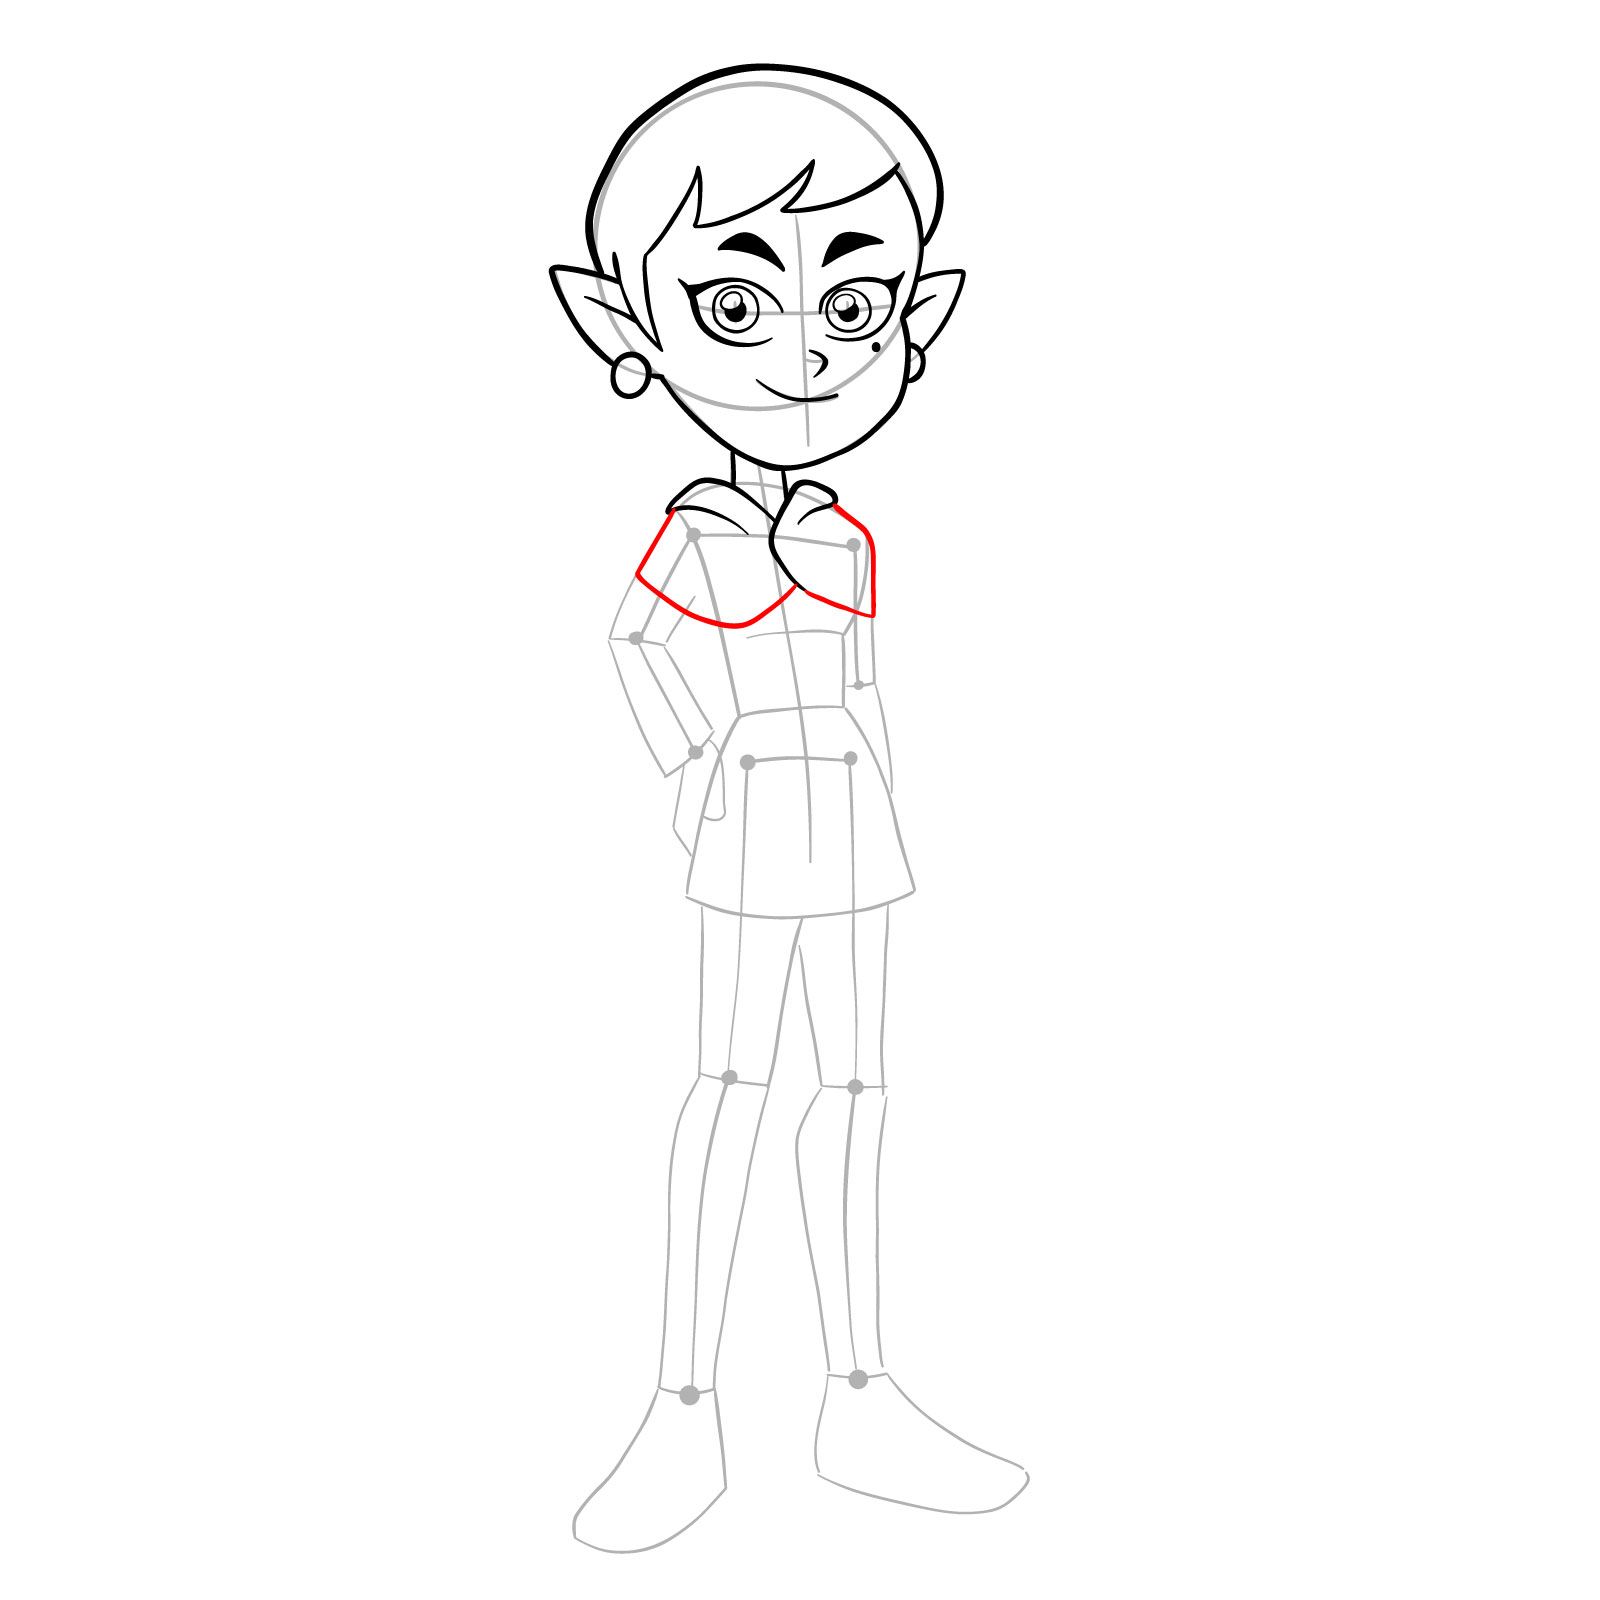 How to draw Emira Blight from The Owl House - step 14